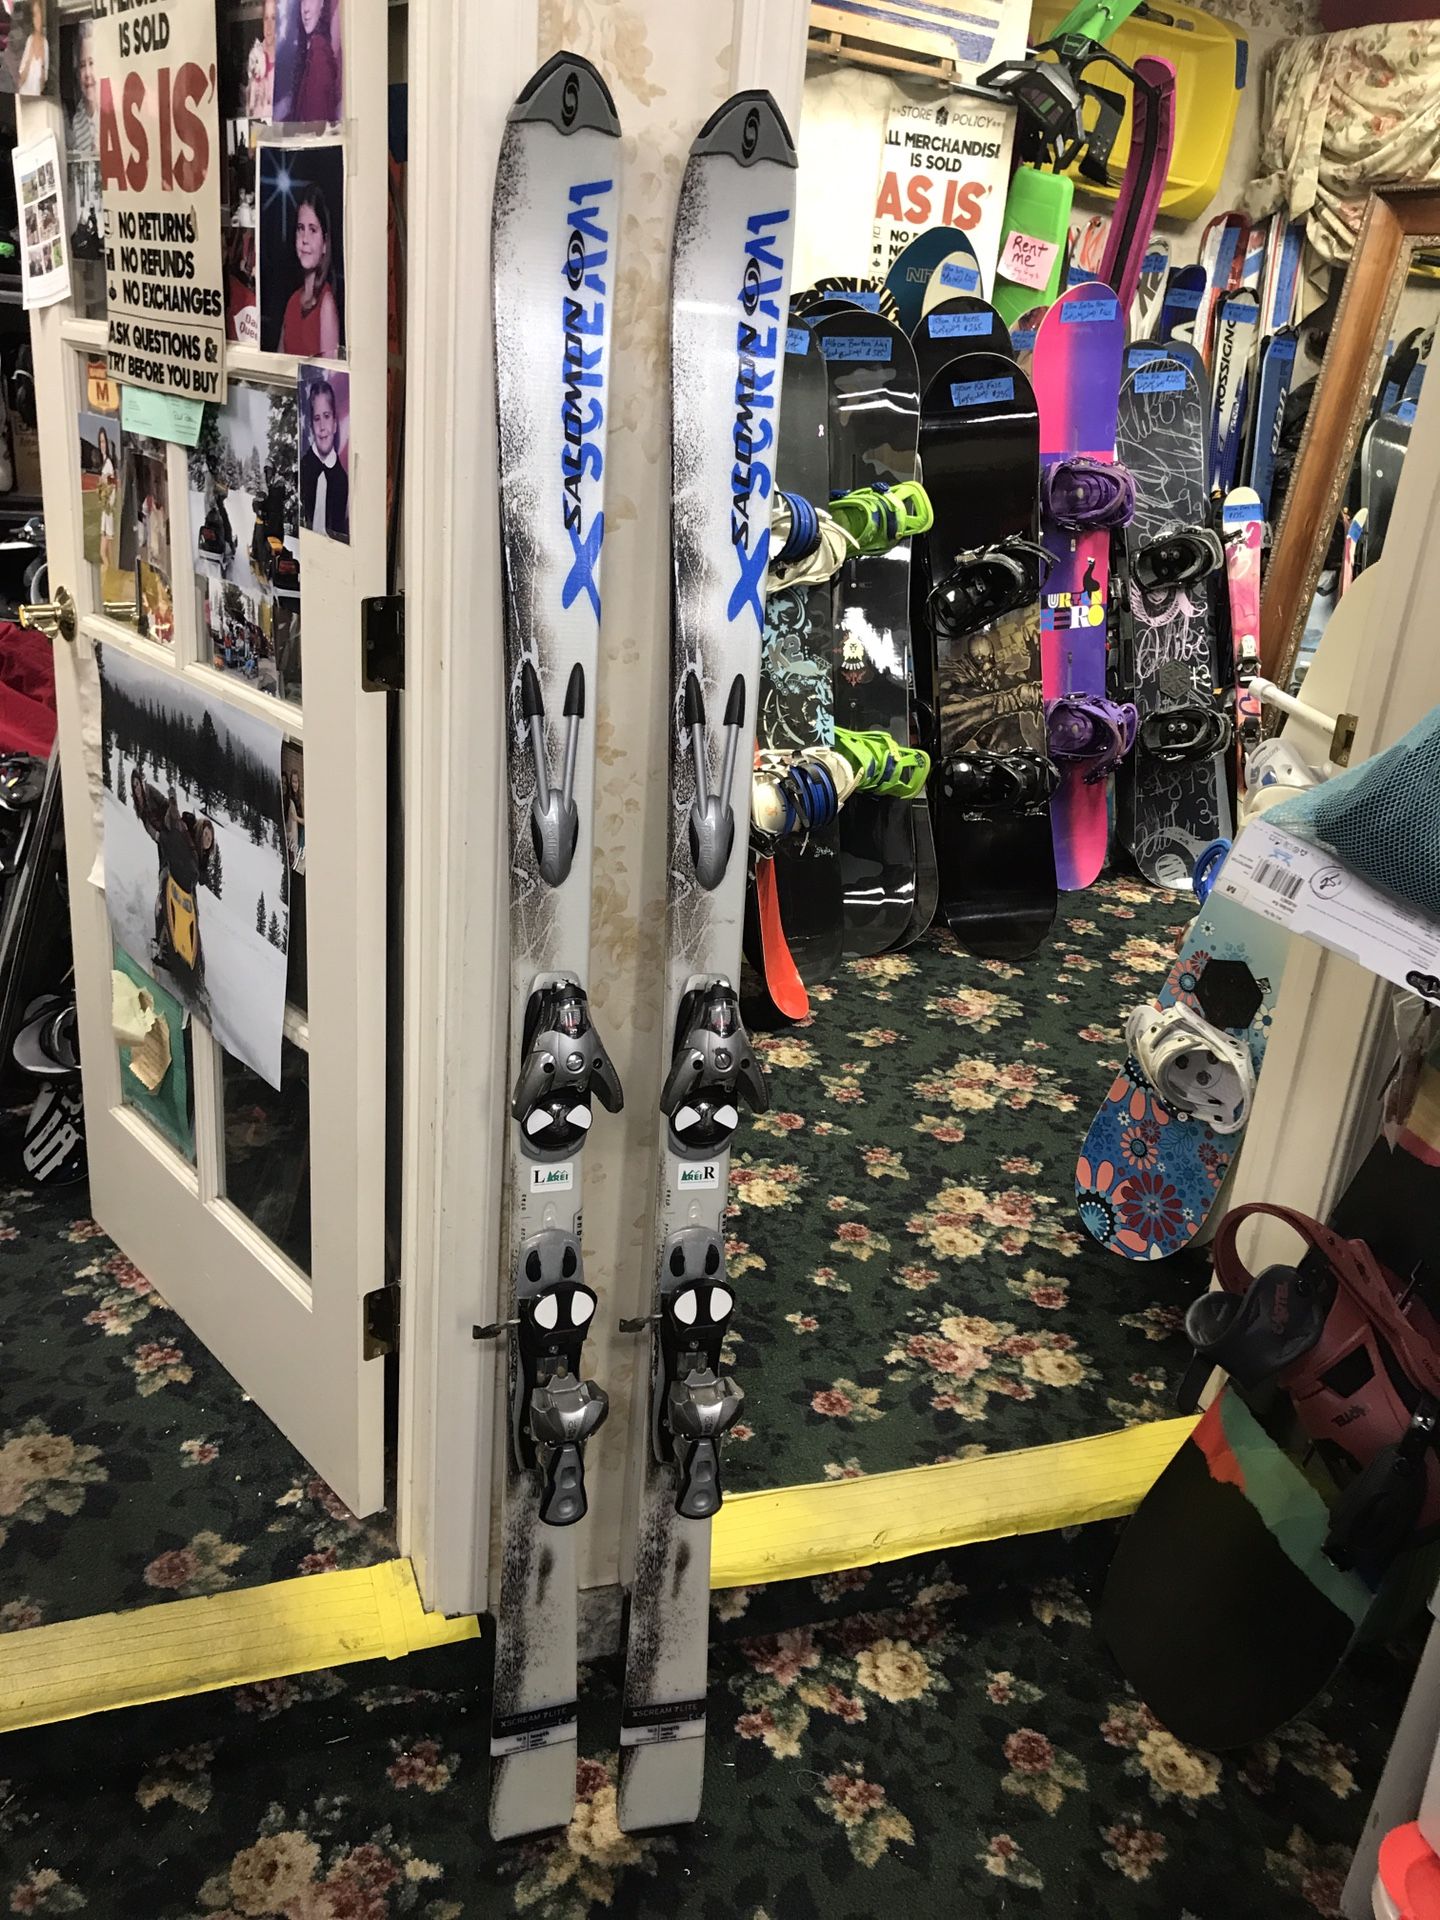 163cm Salomon X-Scream Skis * Like New * Doesn’t Look Like They Were Ever Used